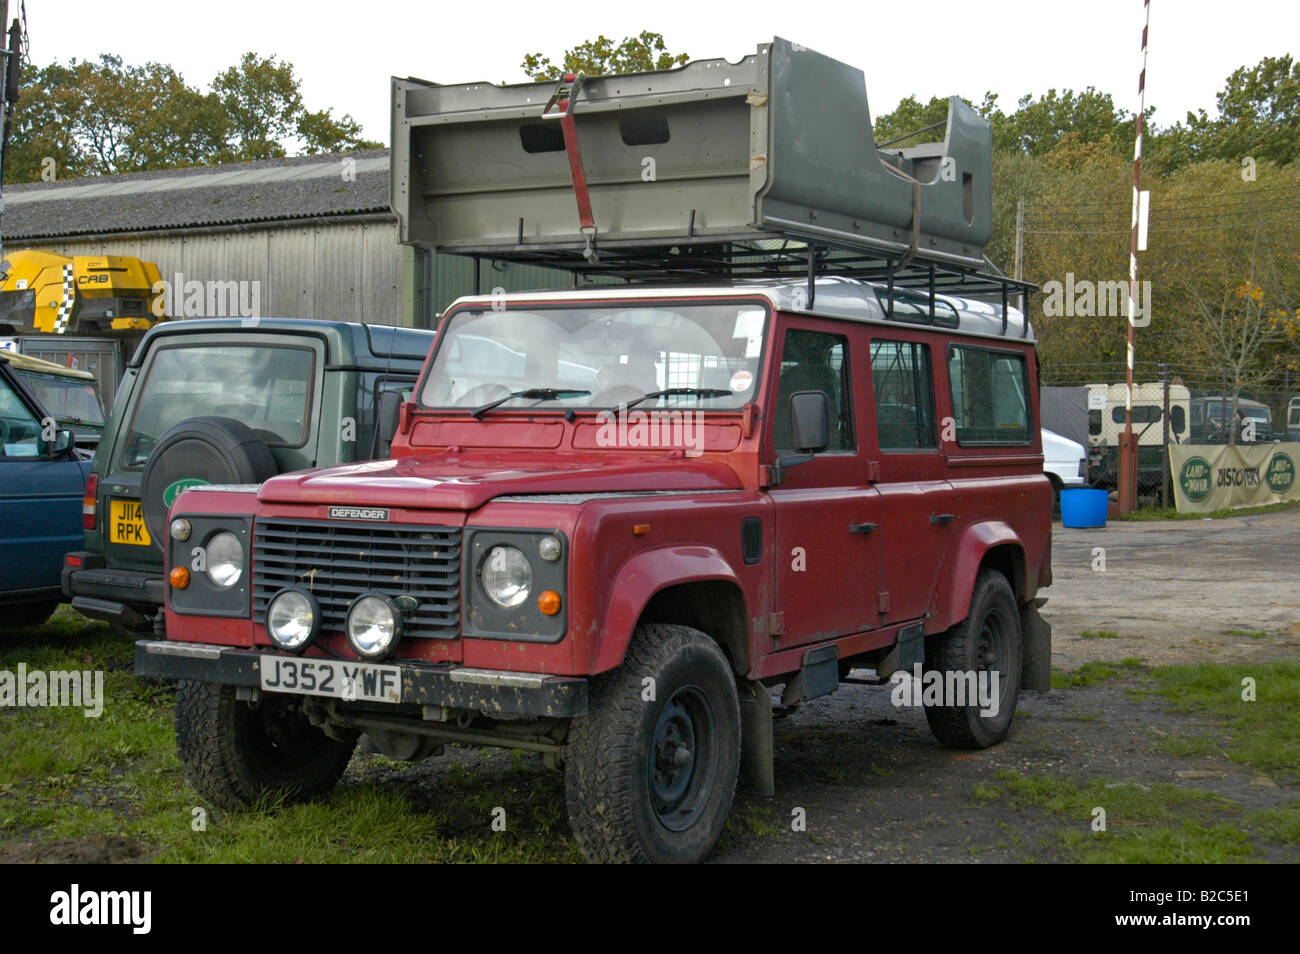 A complete Land Rover 110 HT rear body loaded onto the large roof rack of a Land Rover Defender 110 Station Wagon. Stock Photo